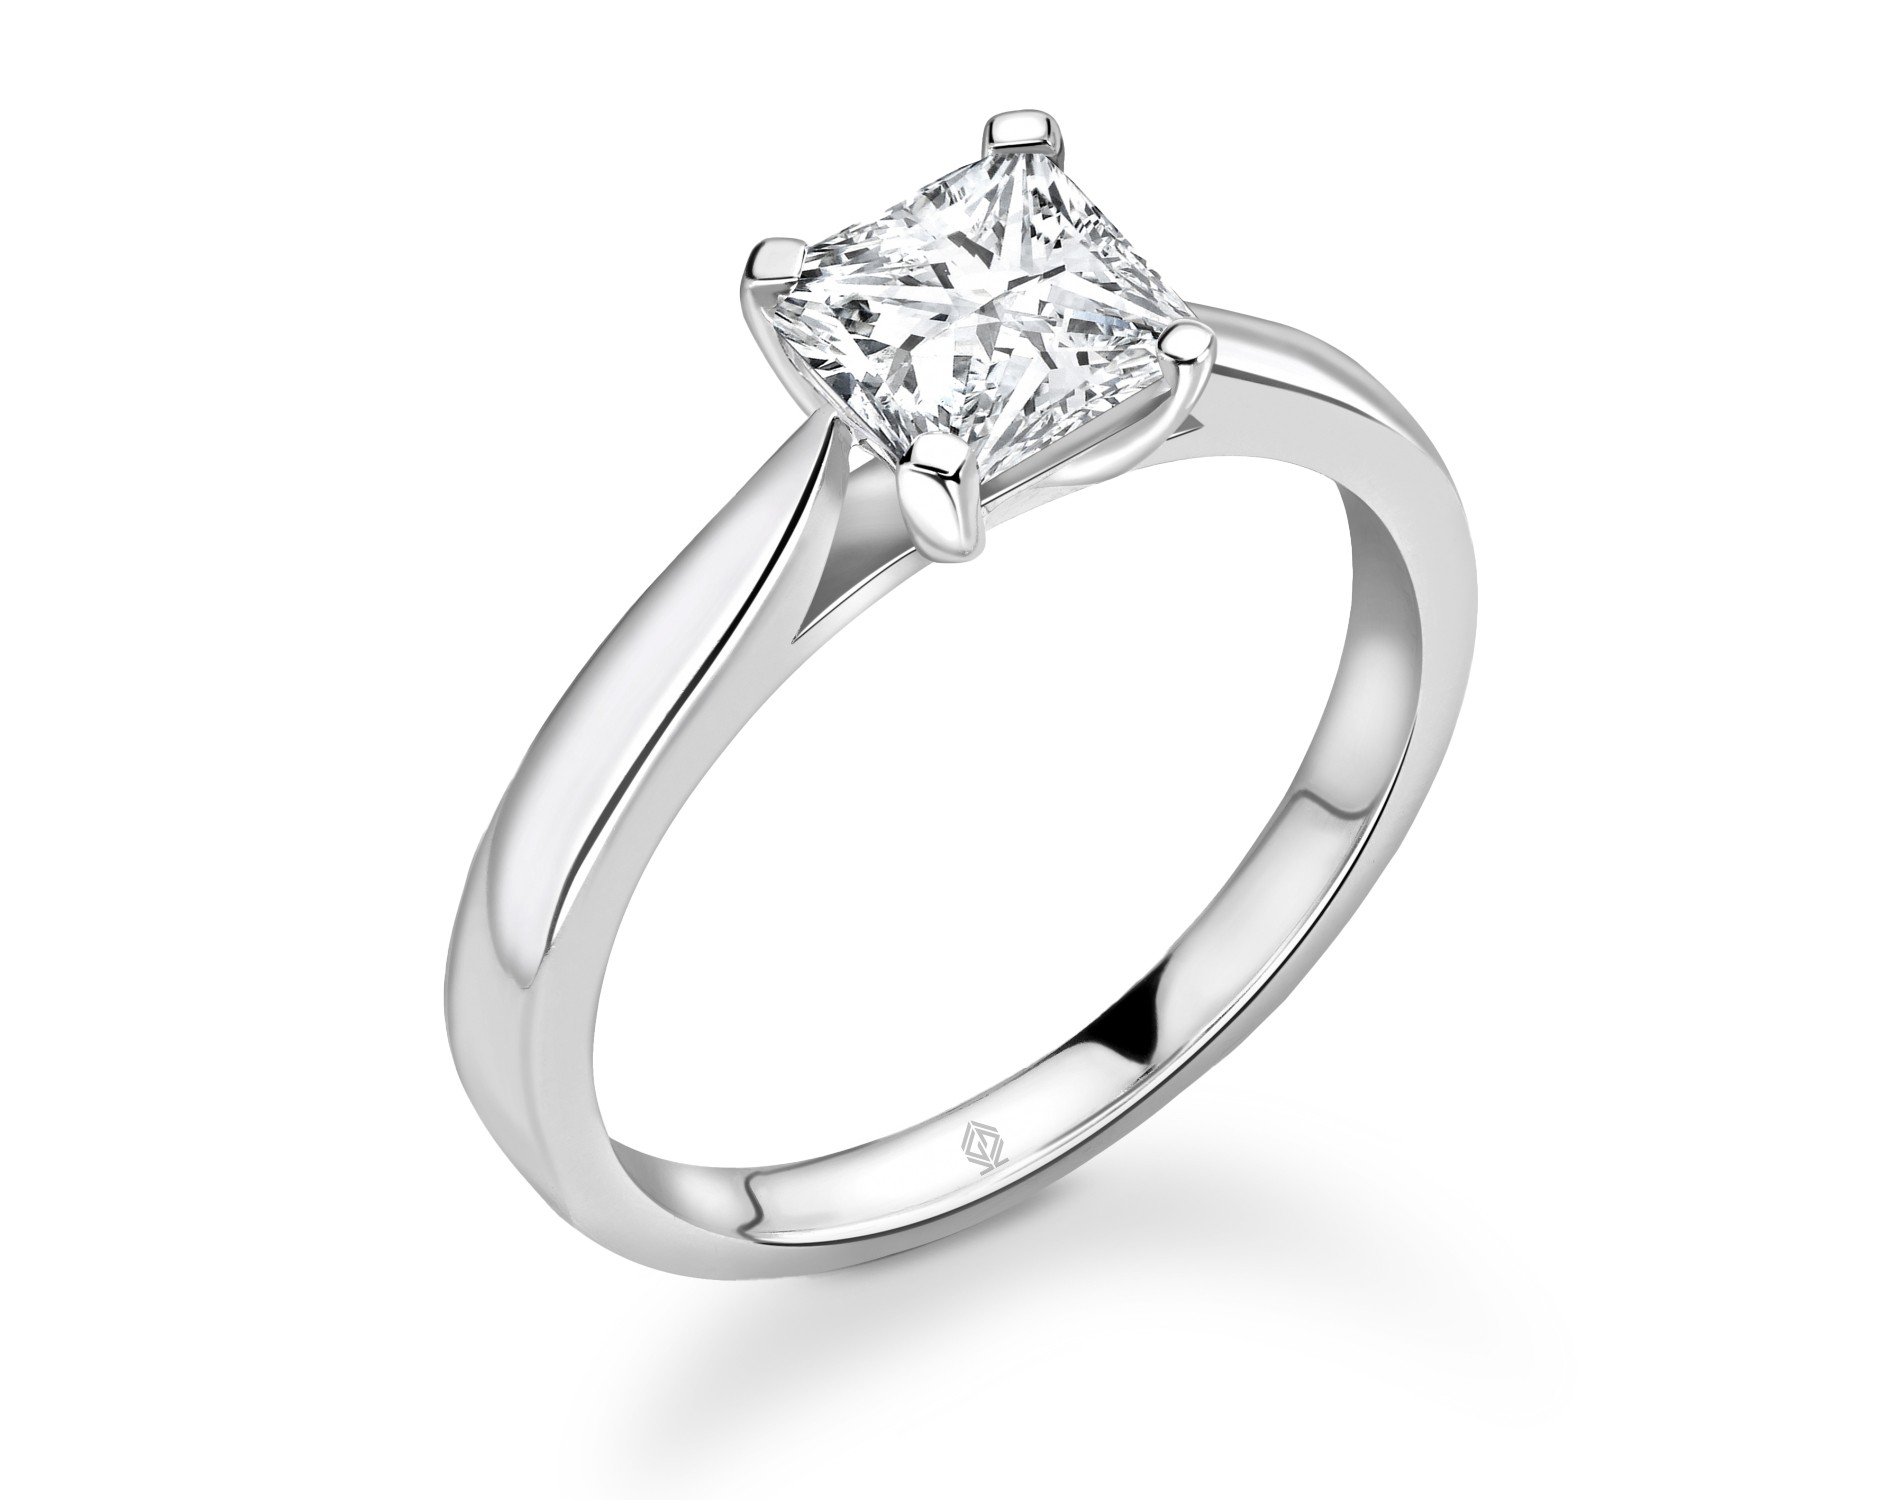 18K WHITE GOLD 4 PRONGS SOLITAIRE CUSHION CUT DIAMOND ENGAGEMENT RING